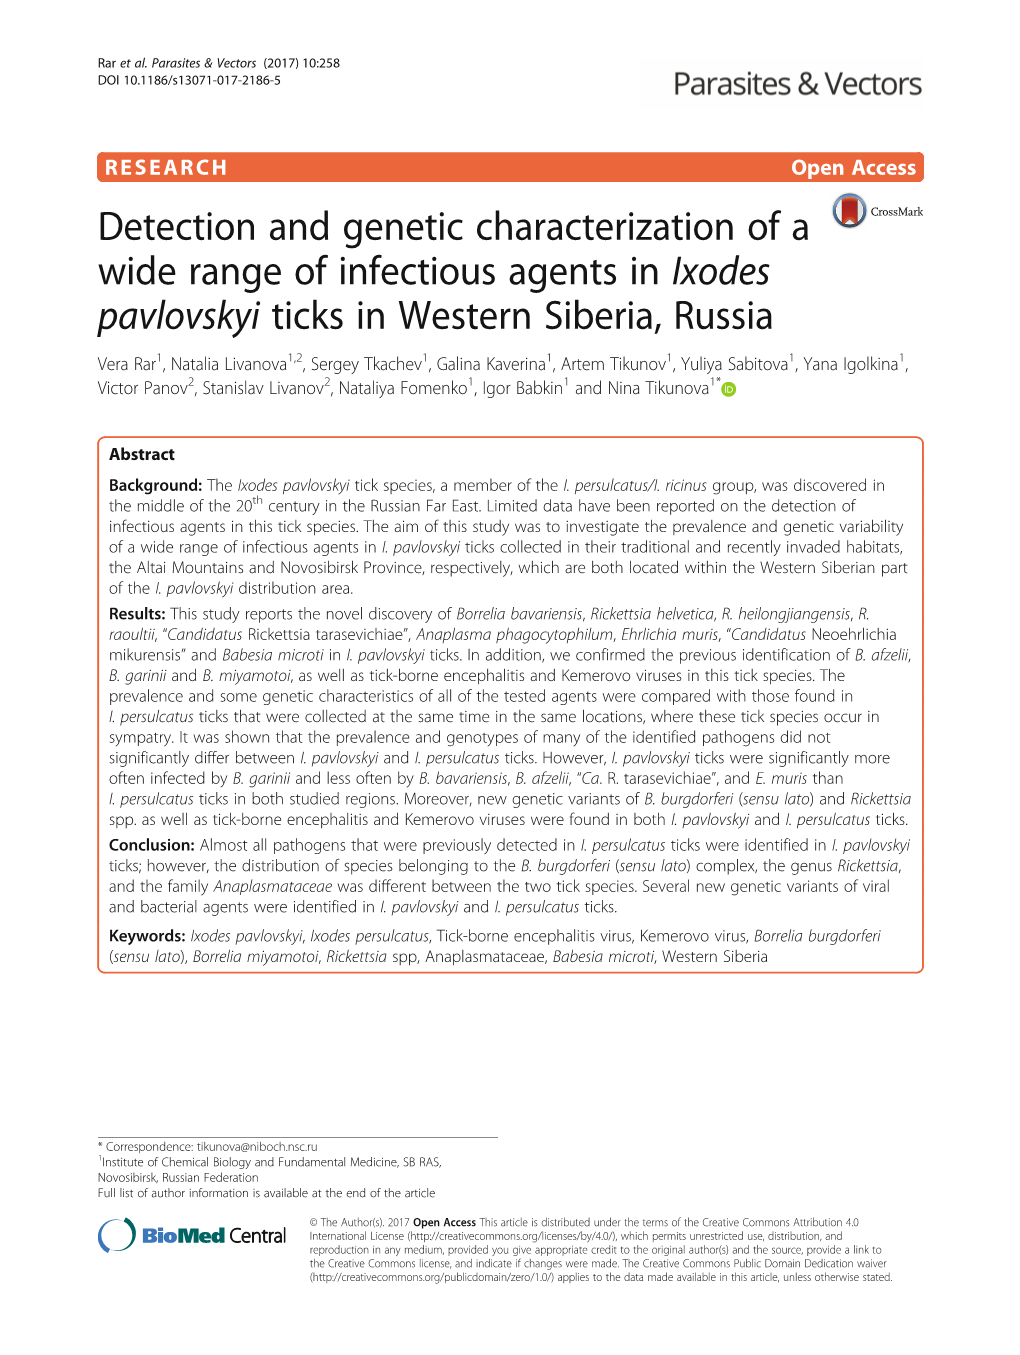 Detection and Genetic Characterization of a Wide Range of Infectious